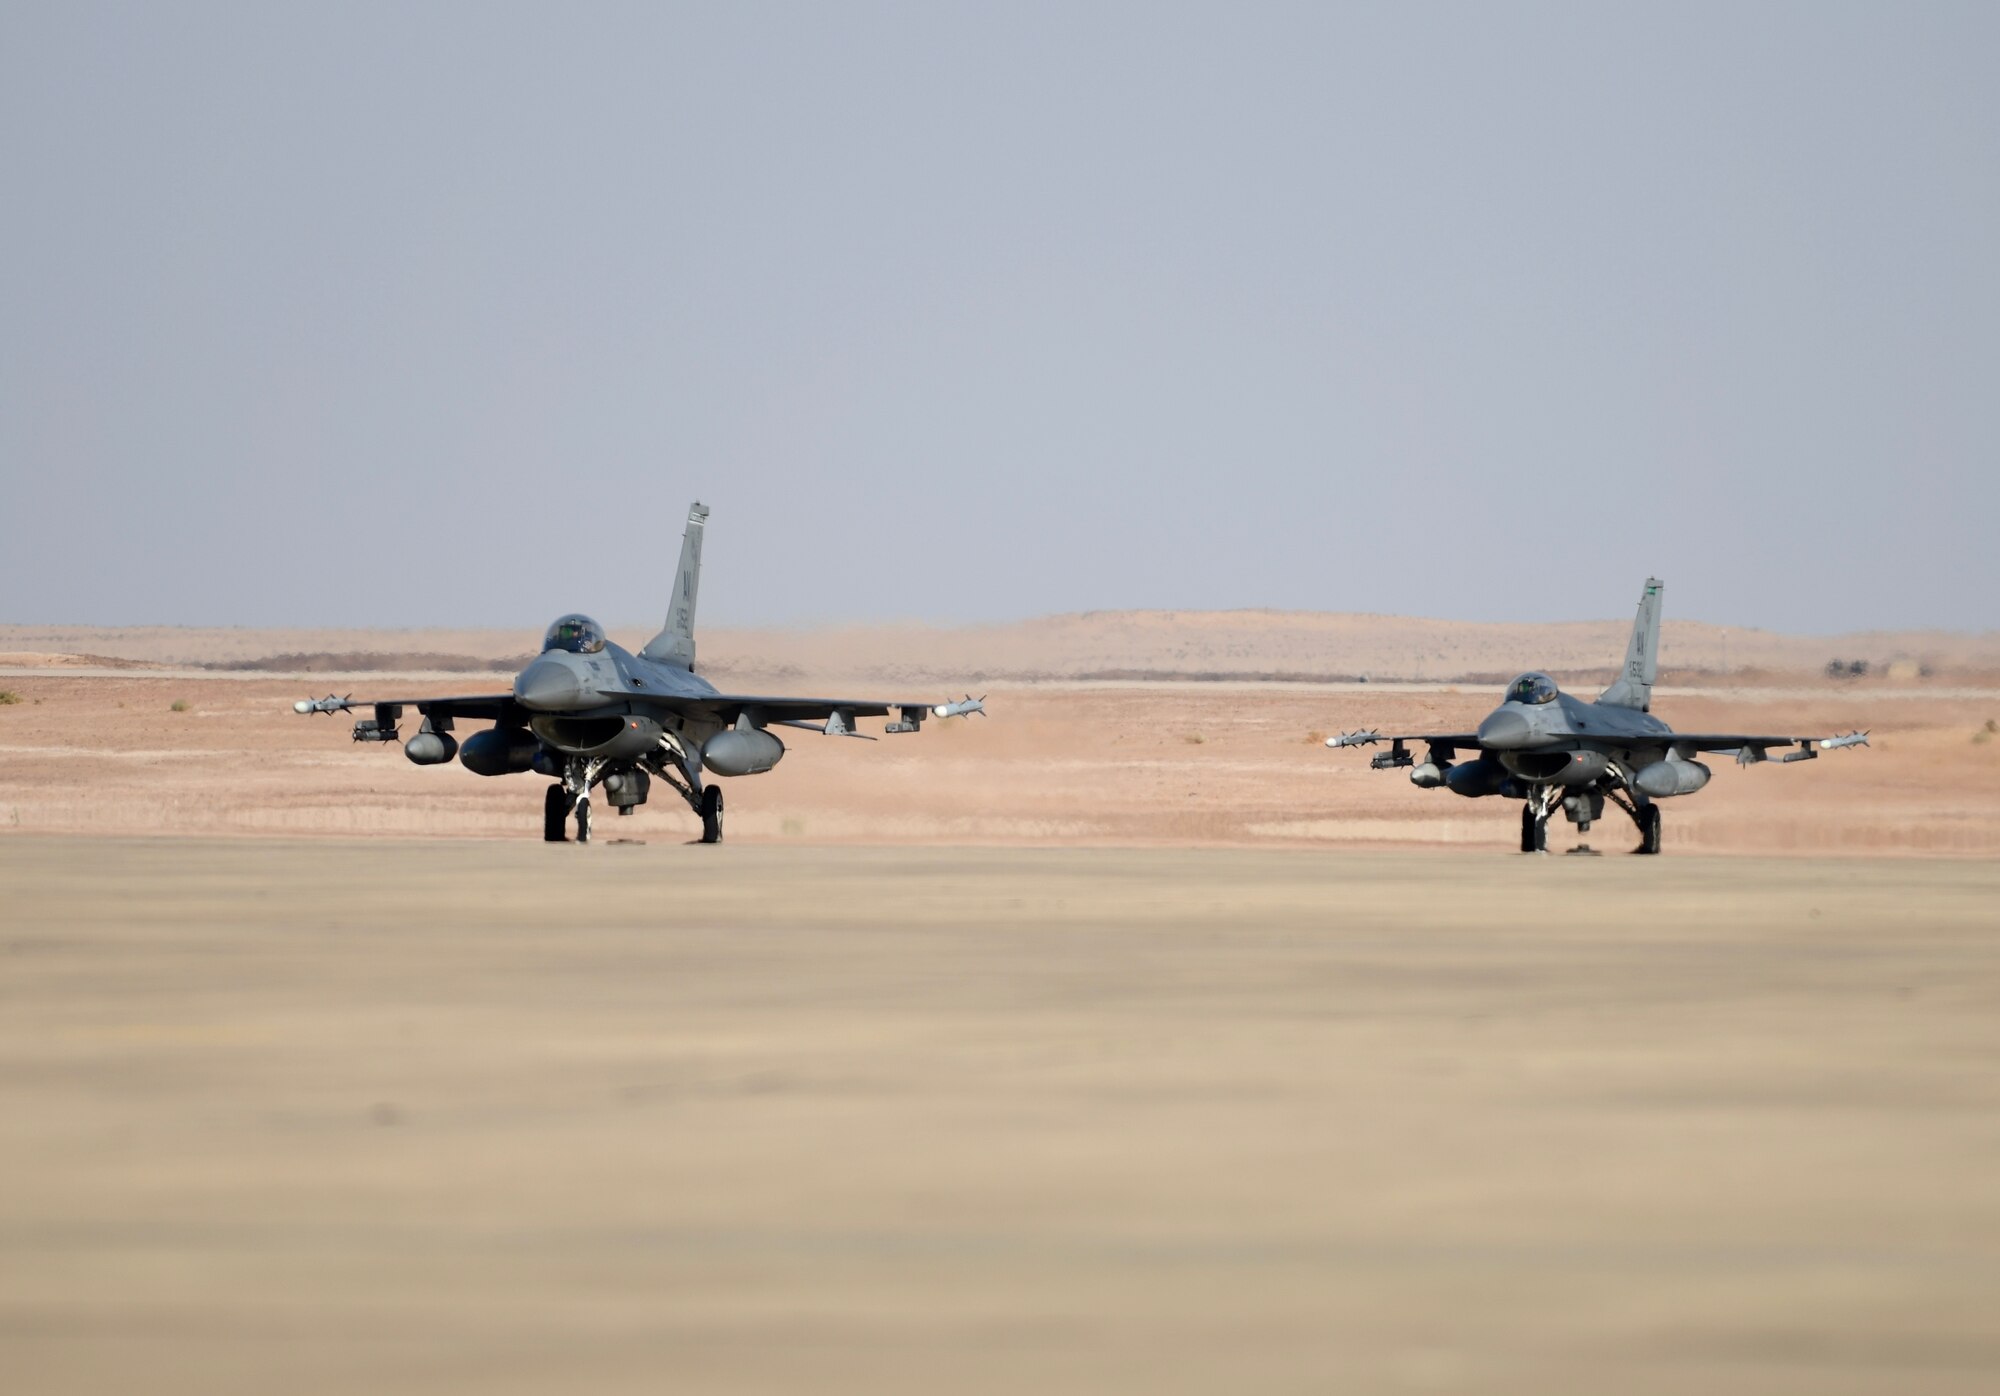 Two F-16 Fighting Falcons, assigned to the 555th Expeditionary Fighter Squadron, taxis after landing Dec. 2, 2019 at Prince Sultan Air Base, Saudi Arabia.